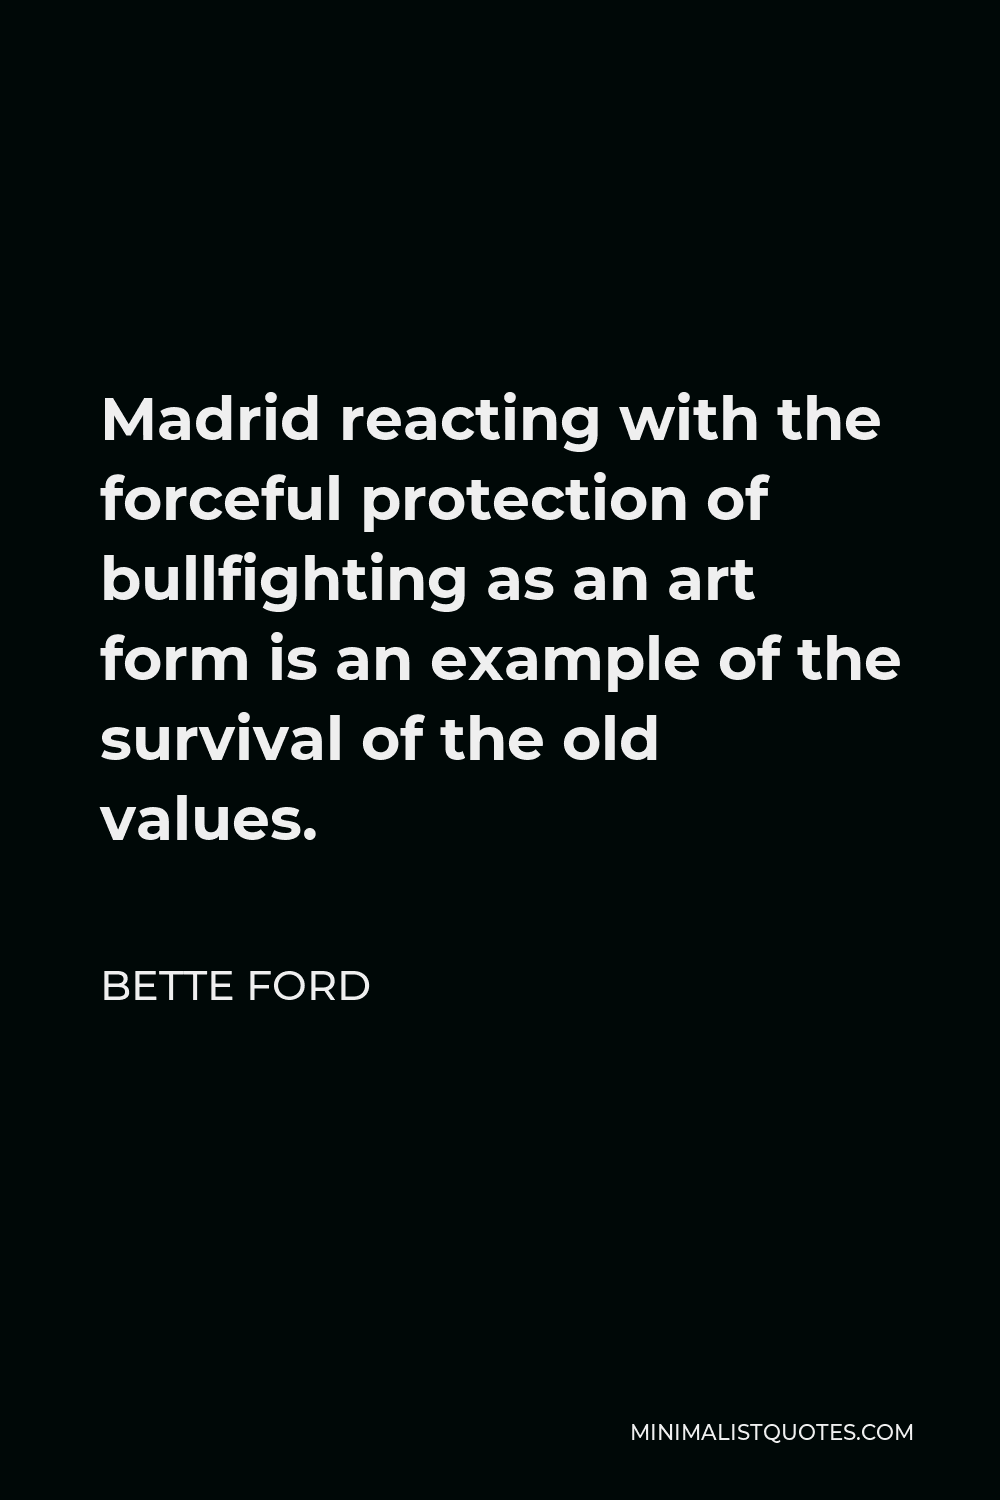 Bette Ford Quote - Madrid reacting with the forceful protection of bullfighting as an art form is an example of the survival of the old values.